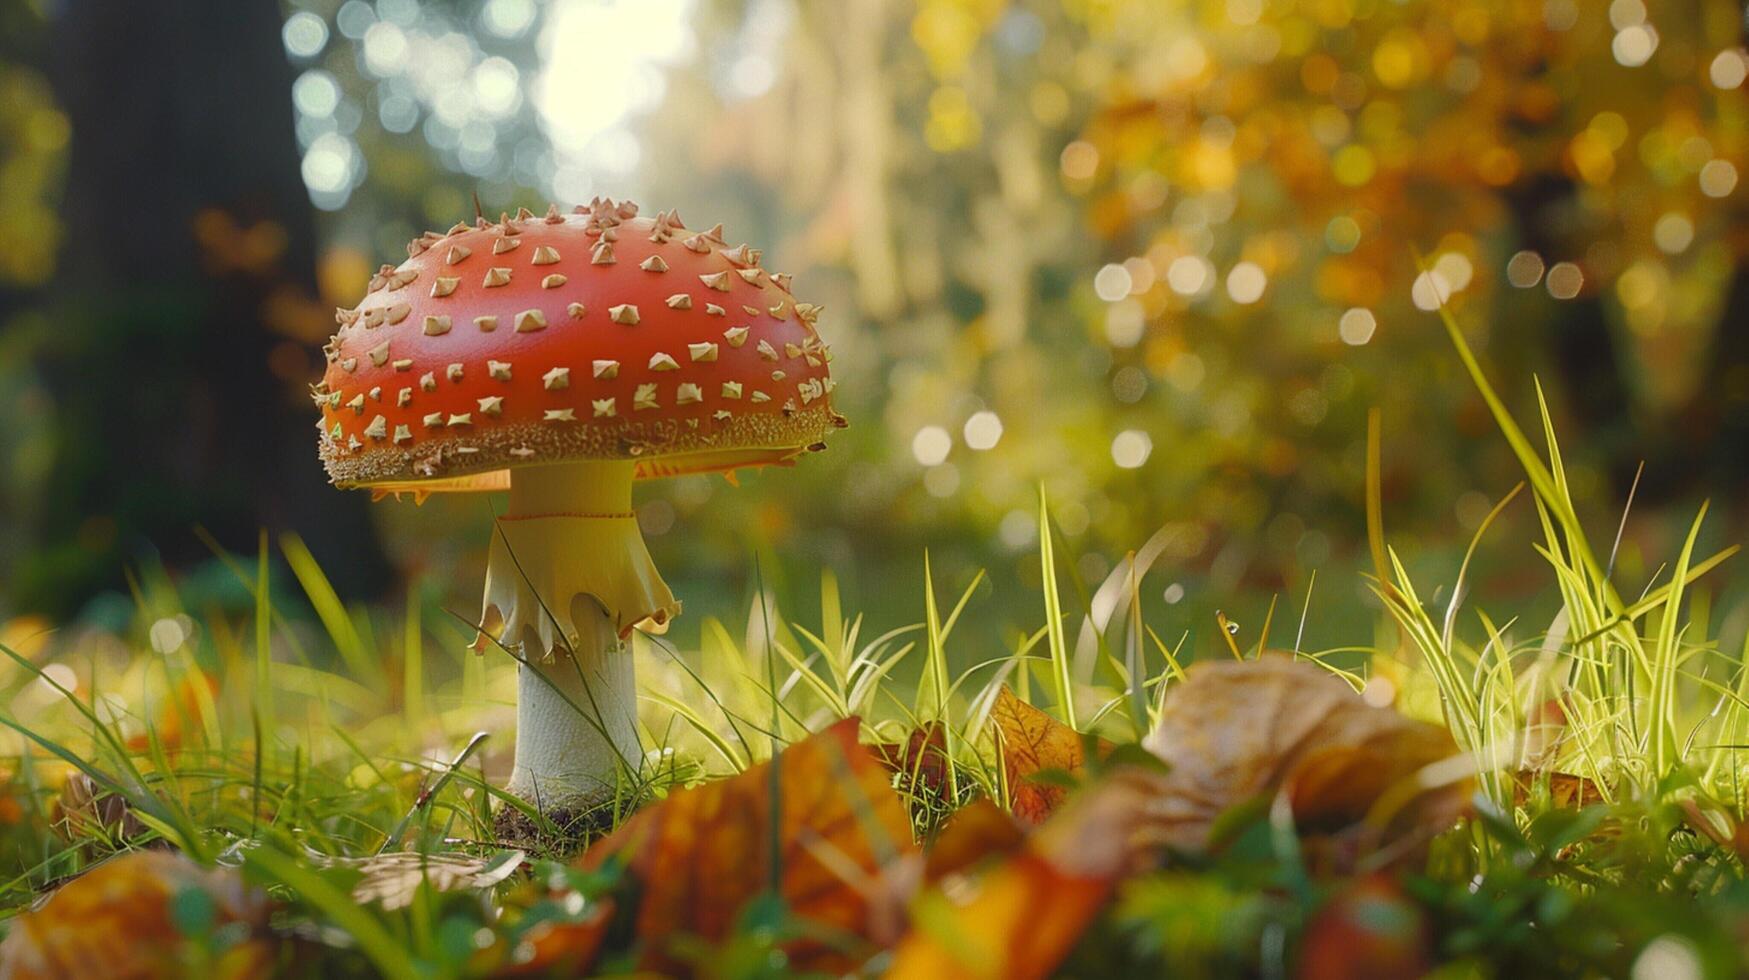 autumn forest close up of edible mushroom on grass photo